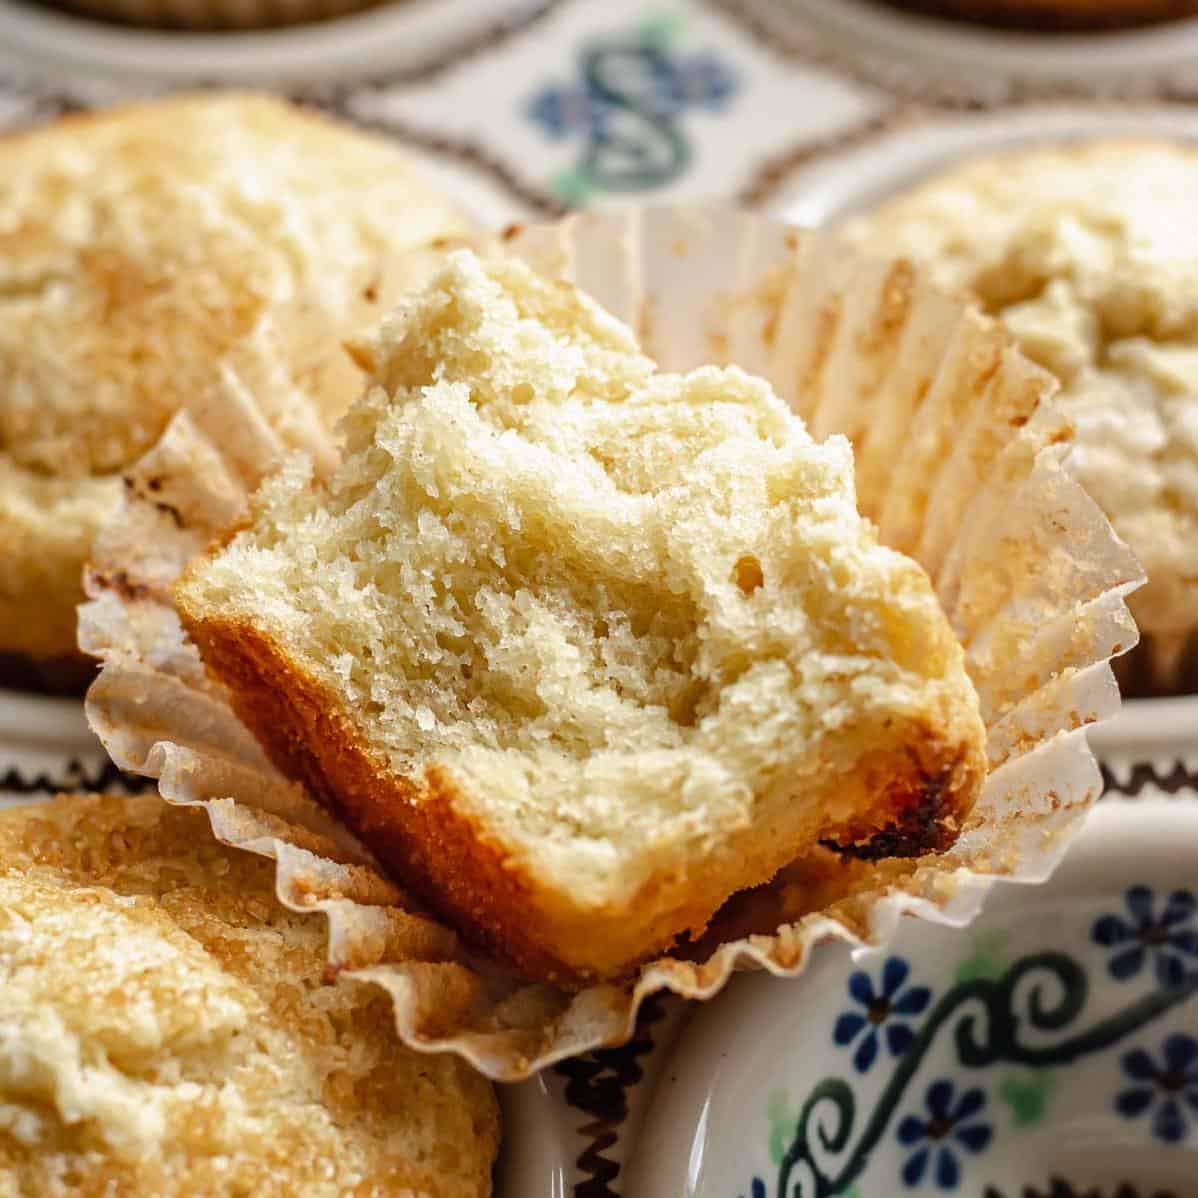  Indulge in the rich and robust flavors of rum-infused muffins.